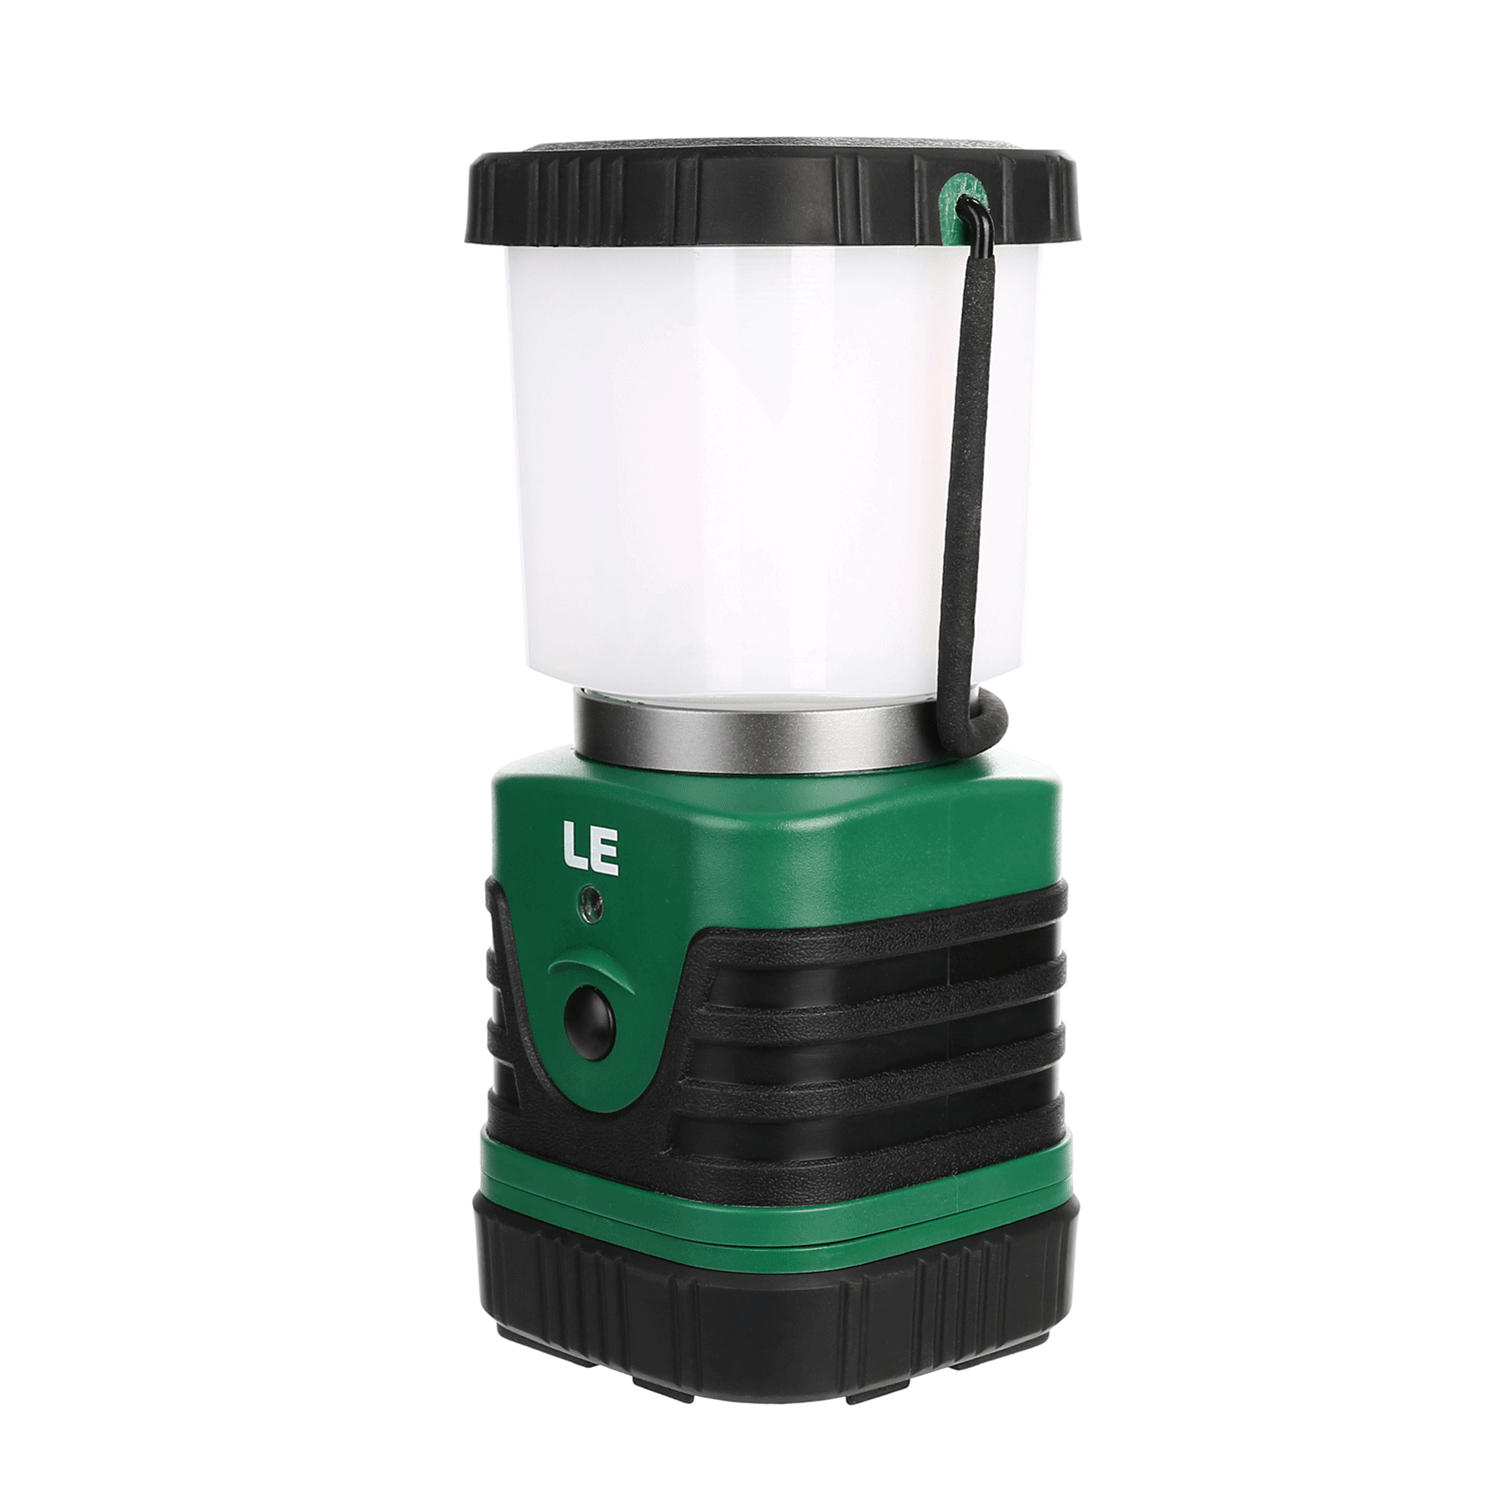 Lepro LED Camping Lantern Rechargeable , 1000LM 4400mAh Long-lasting  Perfect Lantern Flashlight for Hurricane and Power Outage Emergency Backup